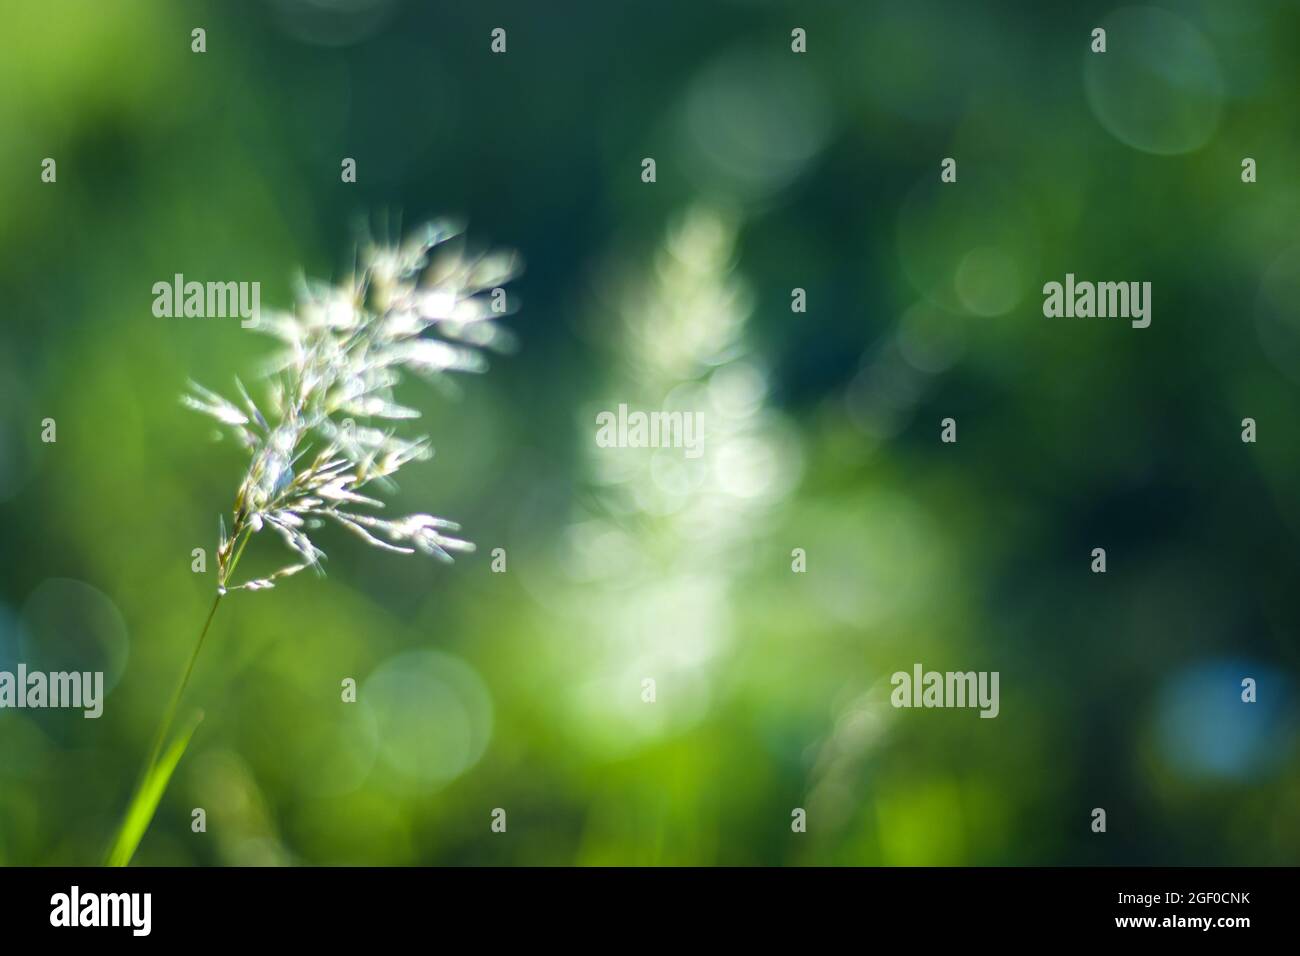 A selective focus shot of perennial ryegrass against bokeh background Stock Photo